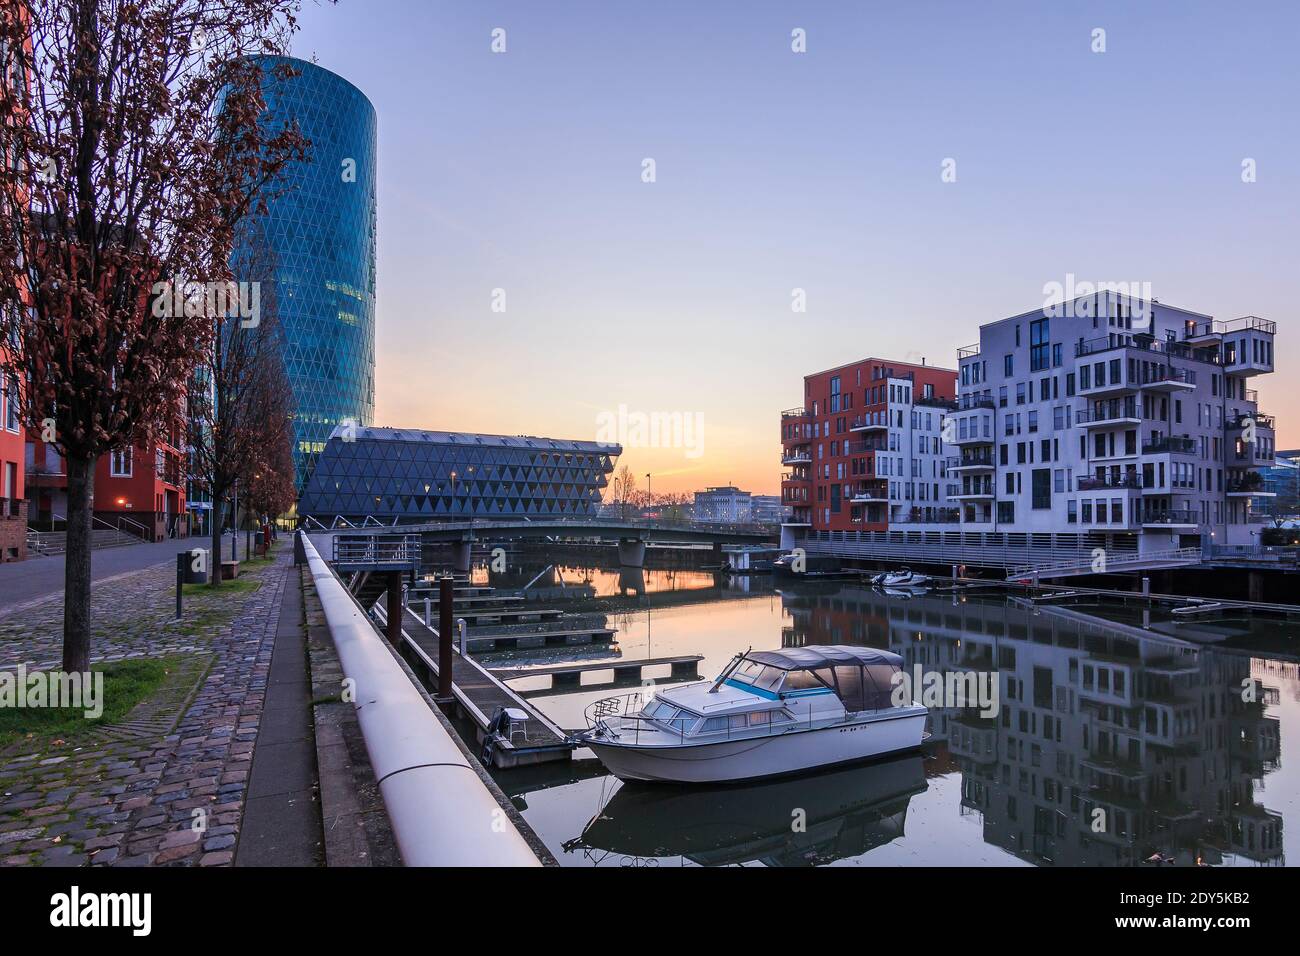 Cityscape in Frankfurt am Main with canal and buildings. Boats in the harbor before sunrise in the West Harbor residential area. Road with trees and r Stock Photo